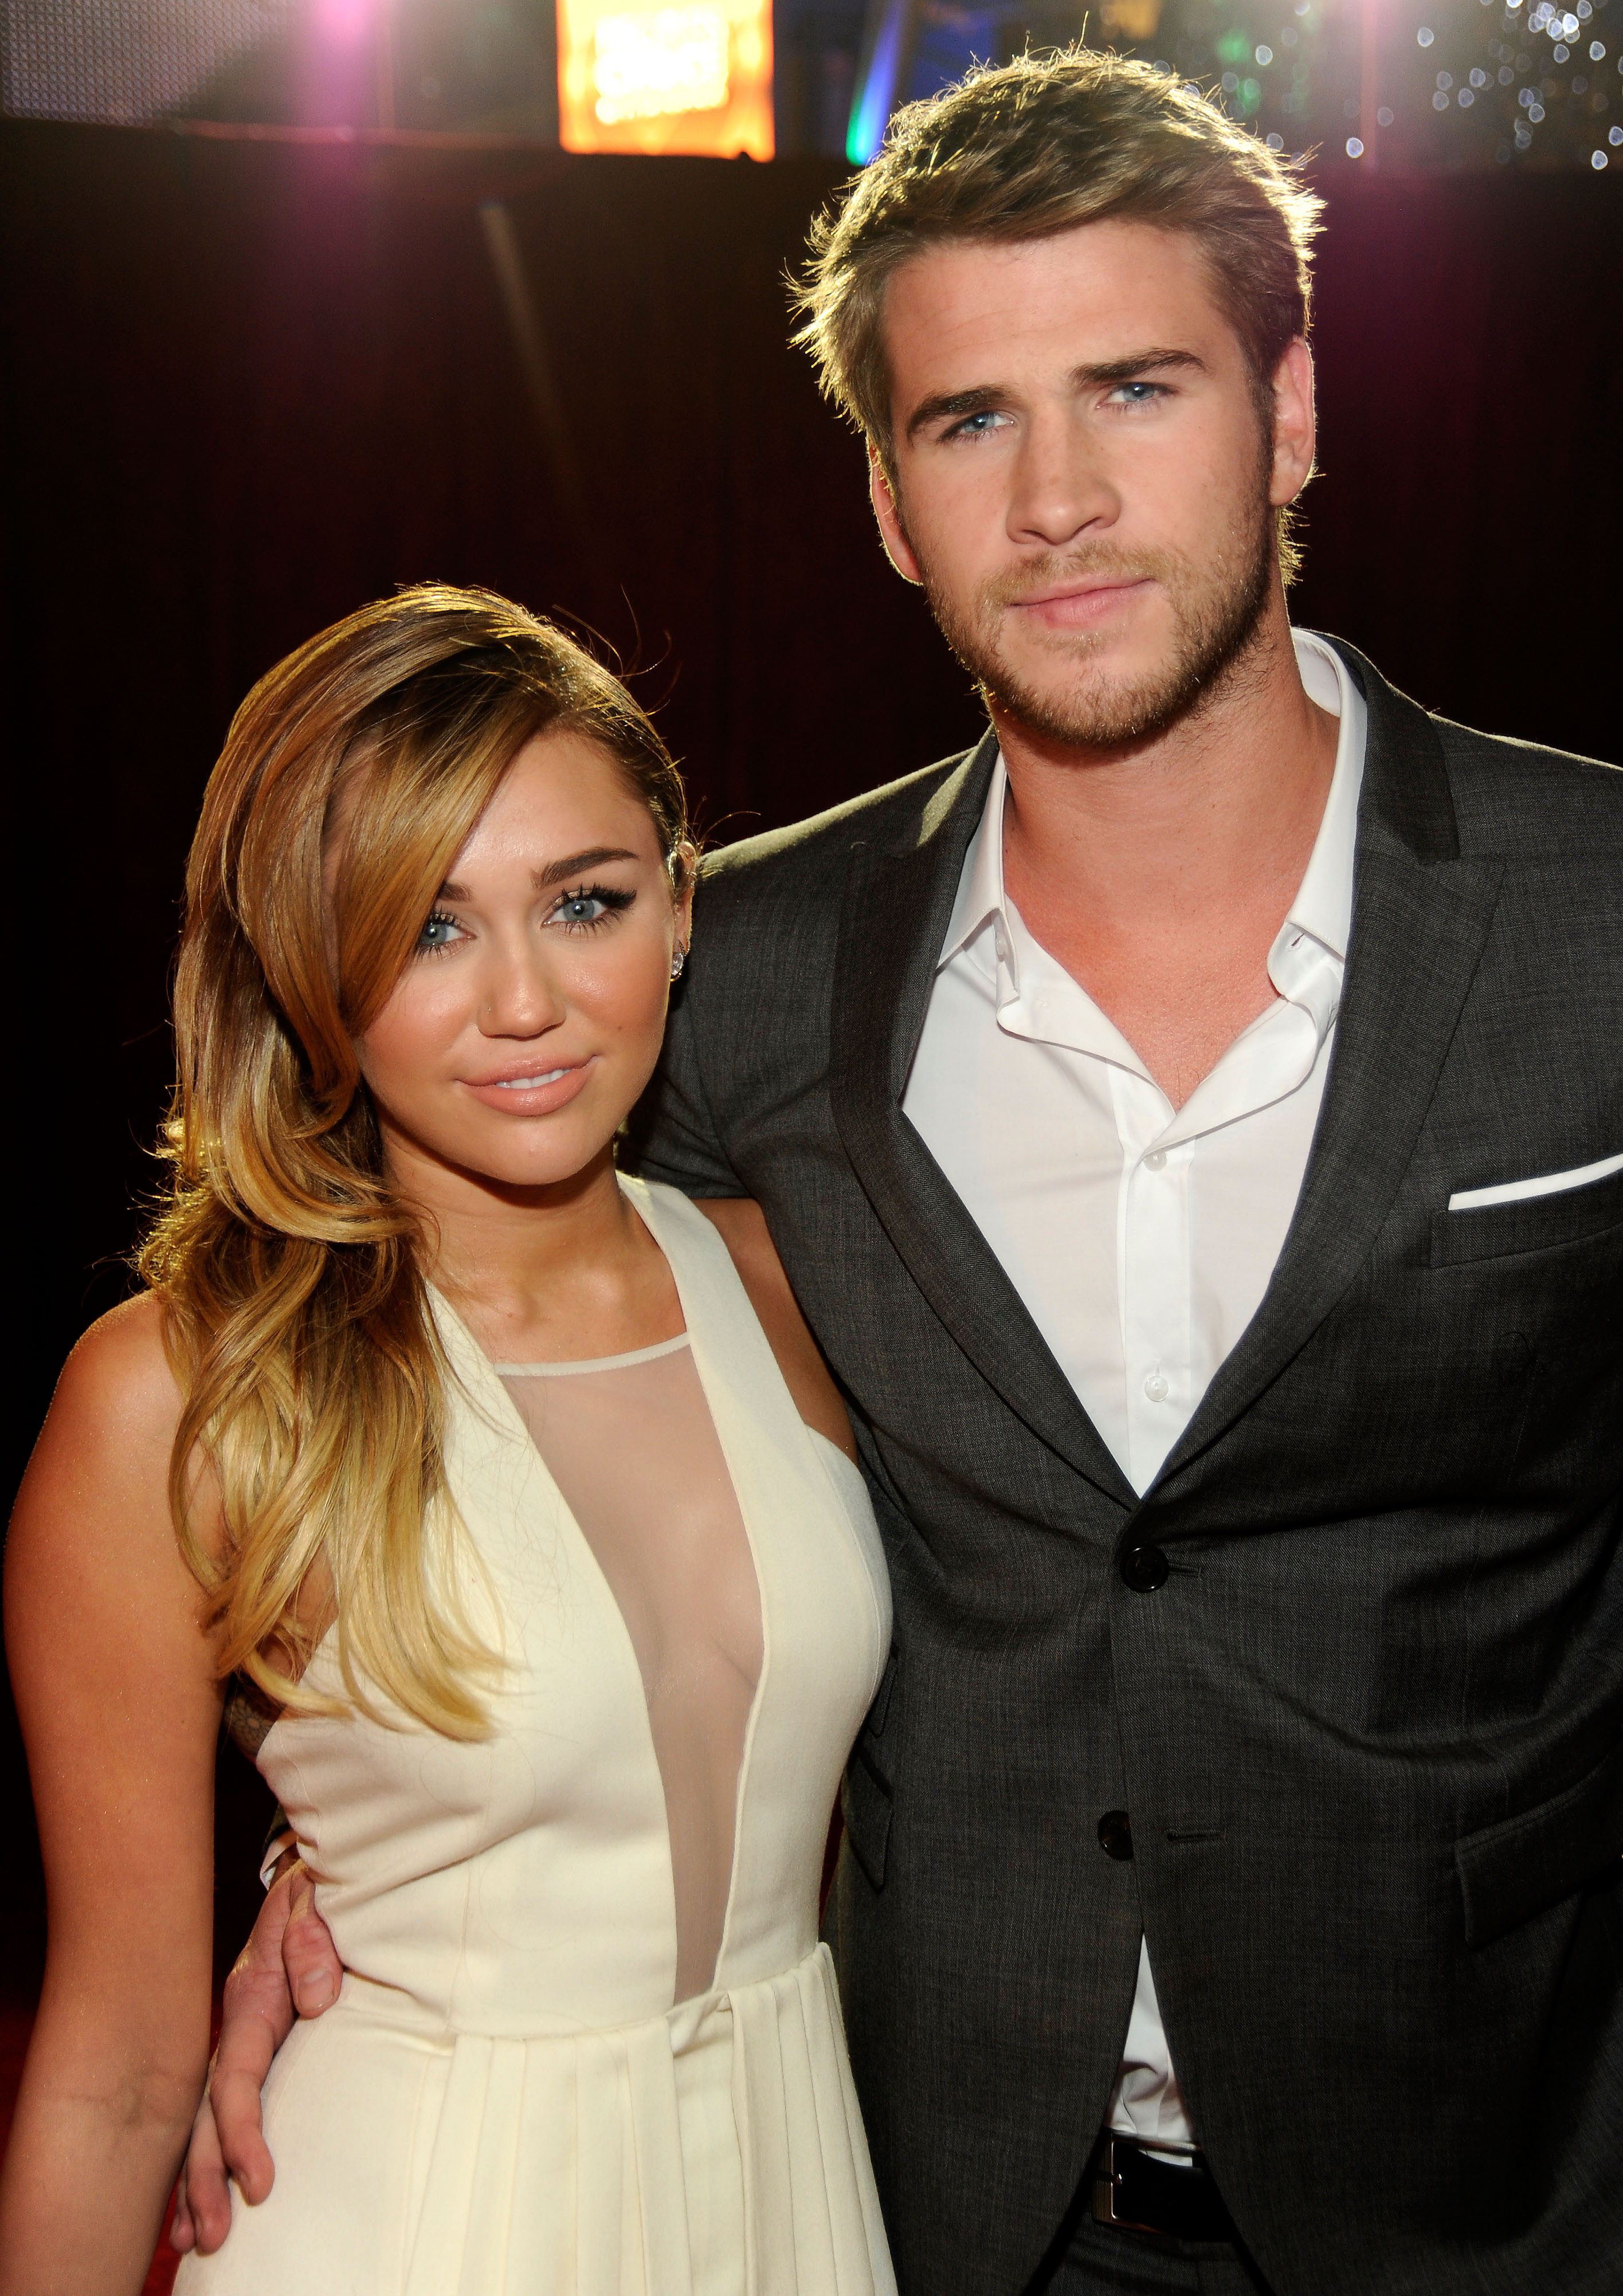 Miley Cyrus Liam Hemsworth Hochzeit
 Miley Cyrus and Liam Hemsworth were to her on the red